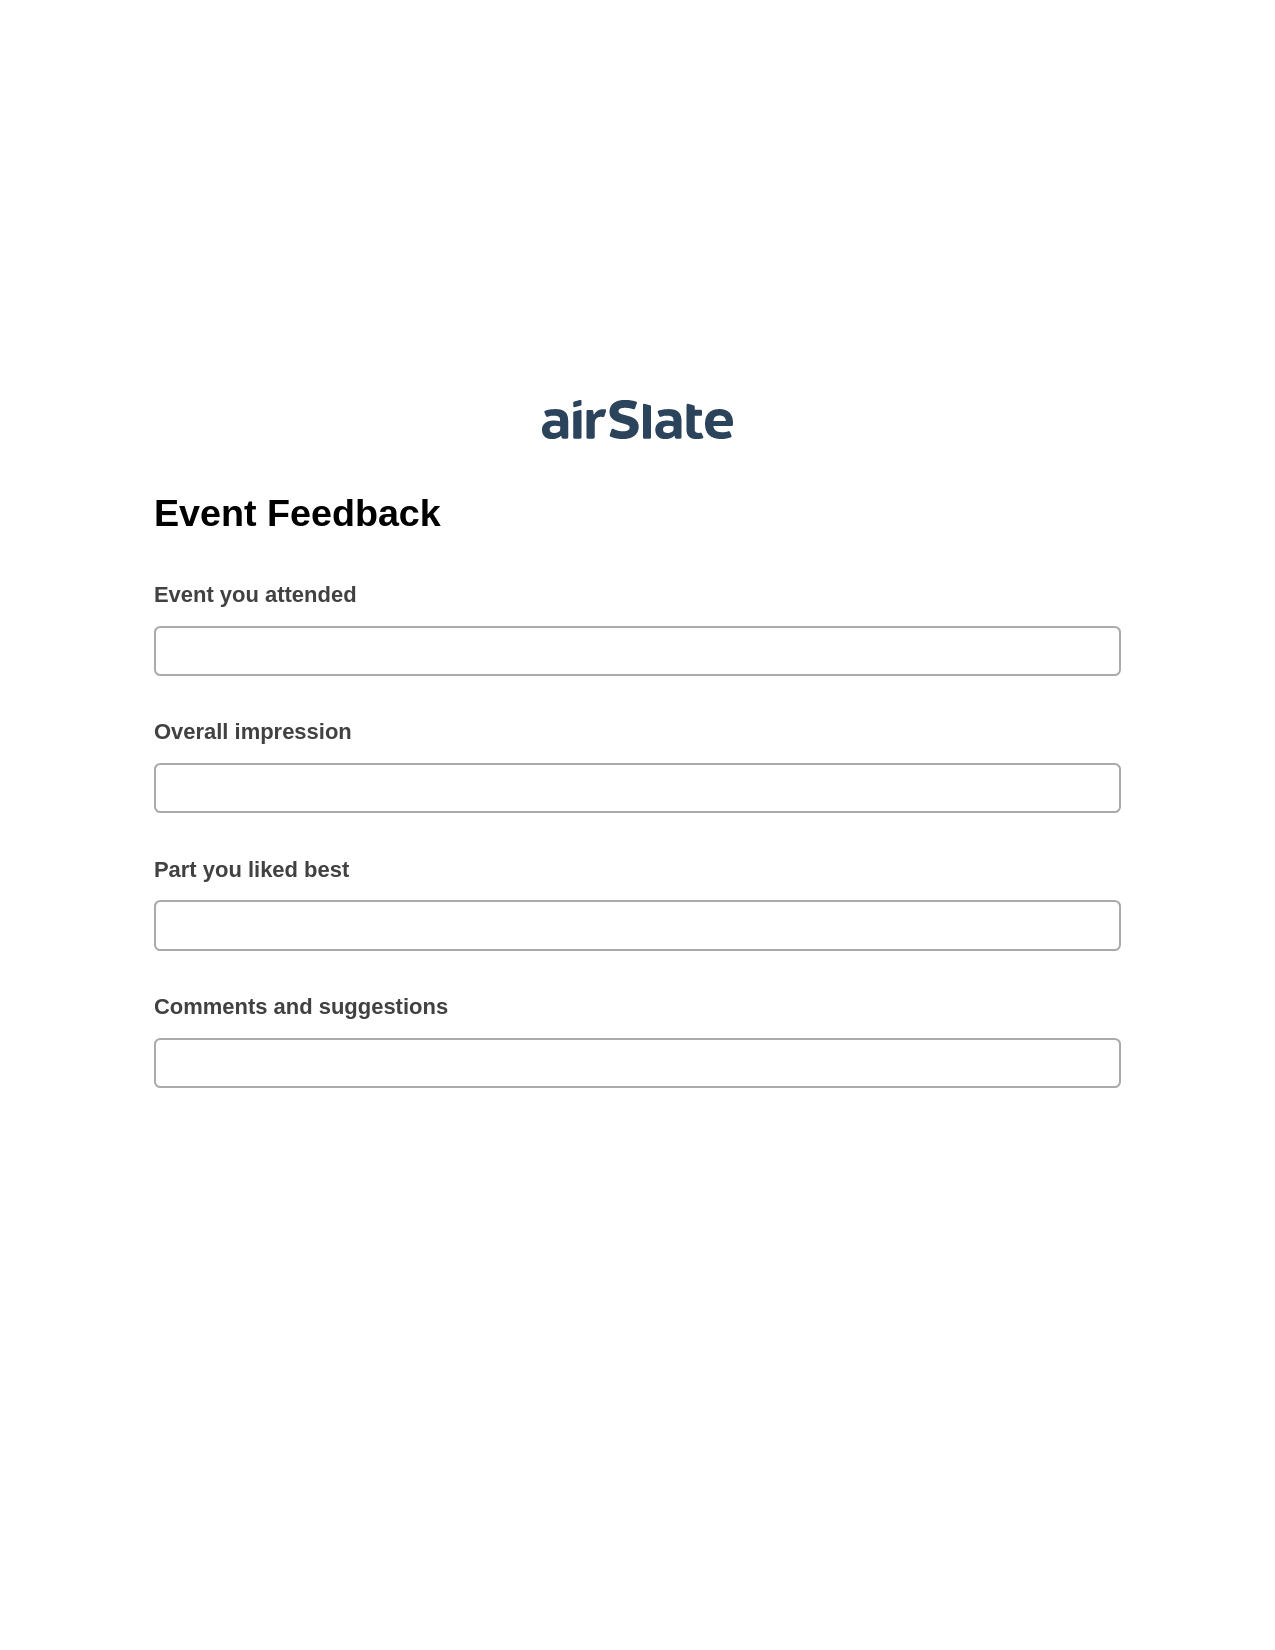 Event Feedback Pre-fill from Salesforce Record Bot, Open as Role Bot, Export to Salesforce Bot